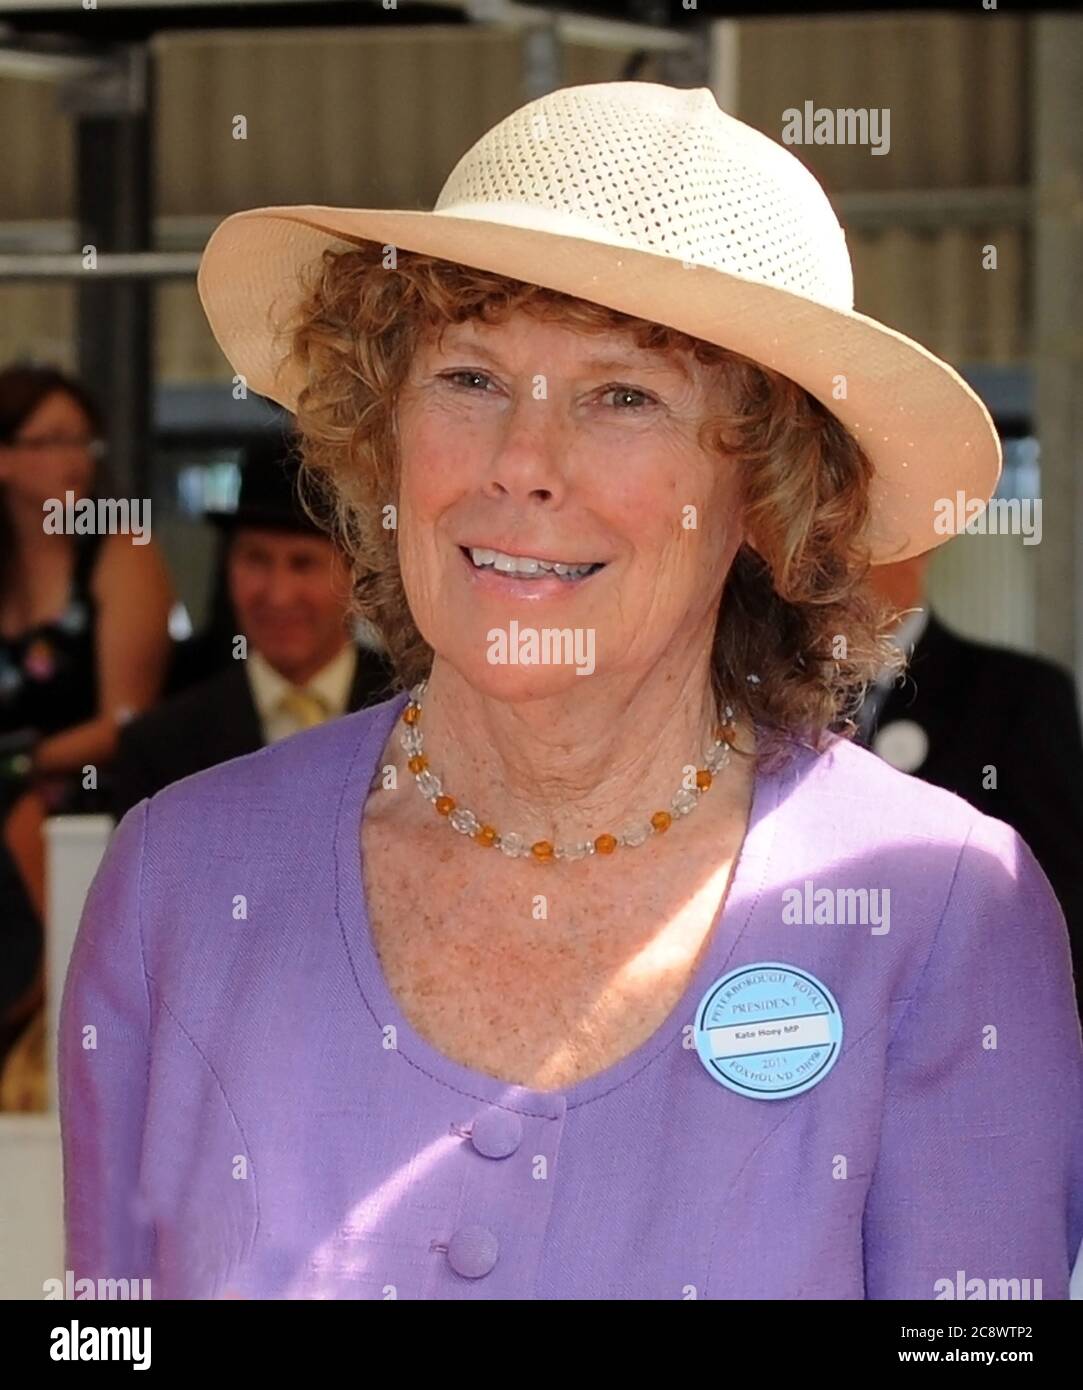 'Kate' Hoey is a Northern Irish politician who served as the Labour Member of Parliament for Vauxhall from the 1989 by-election until November 2019. S Stock Photo